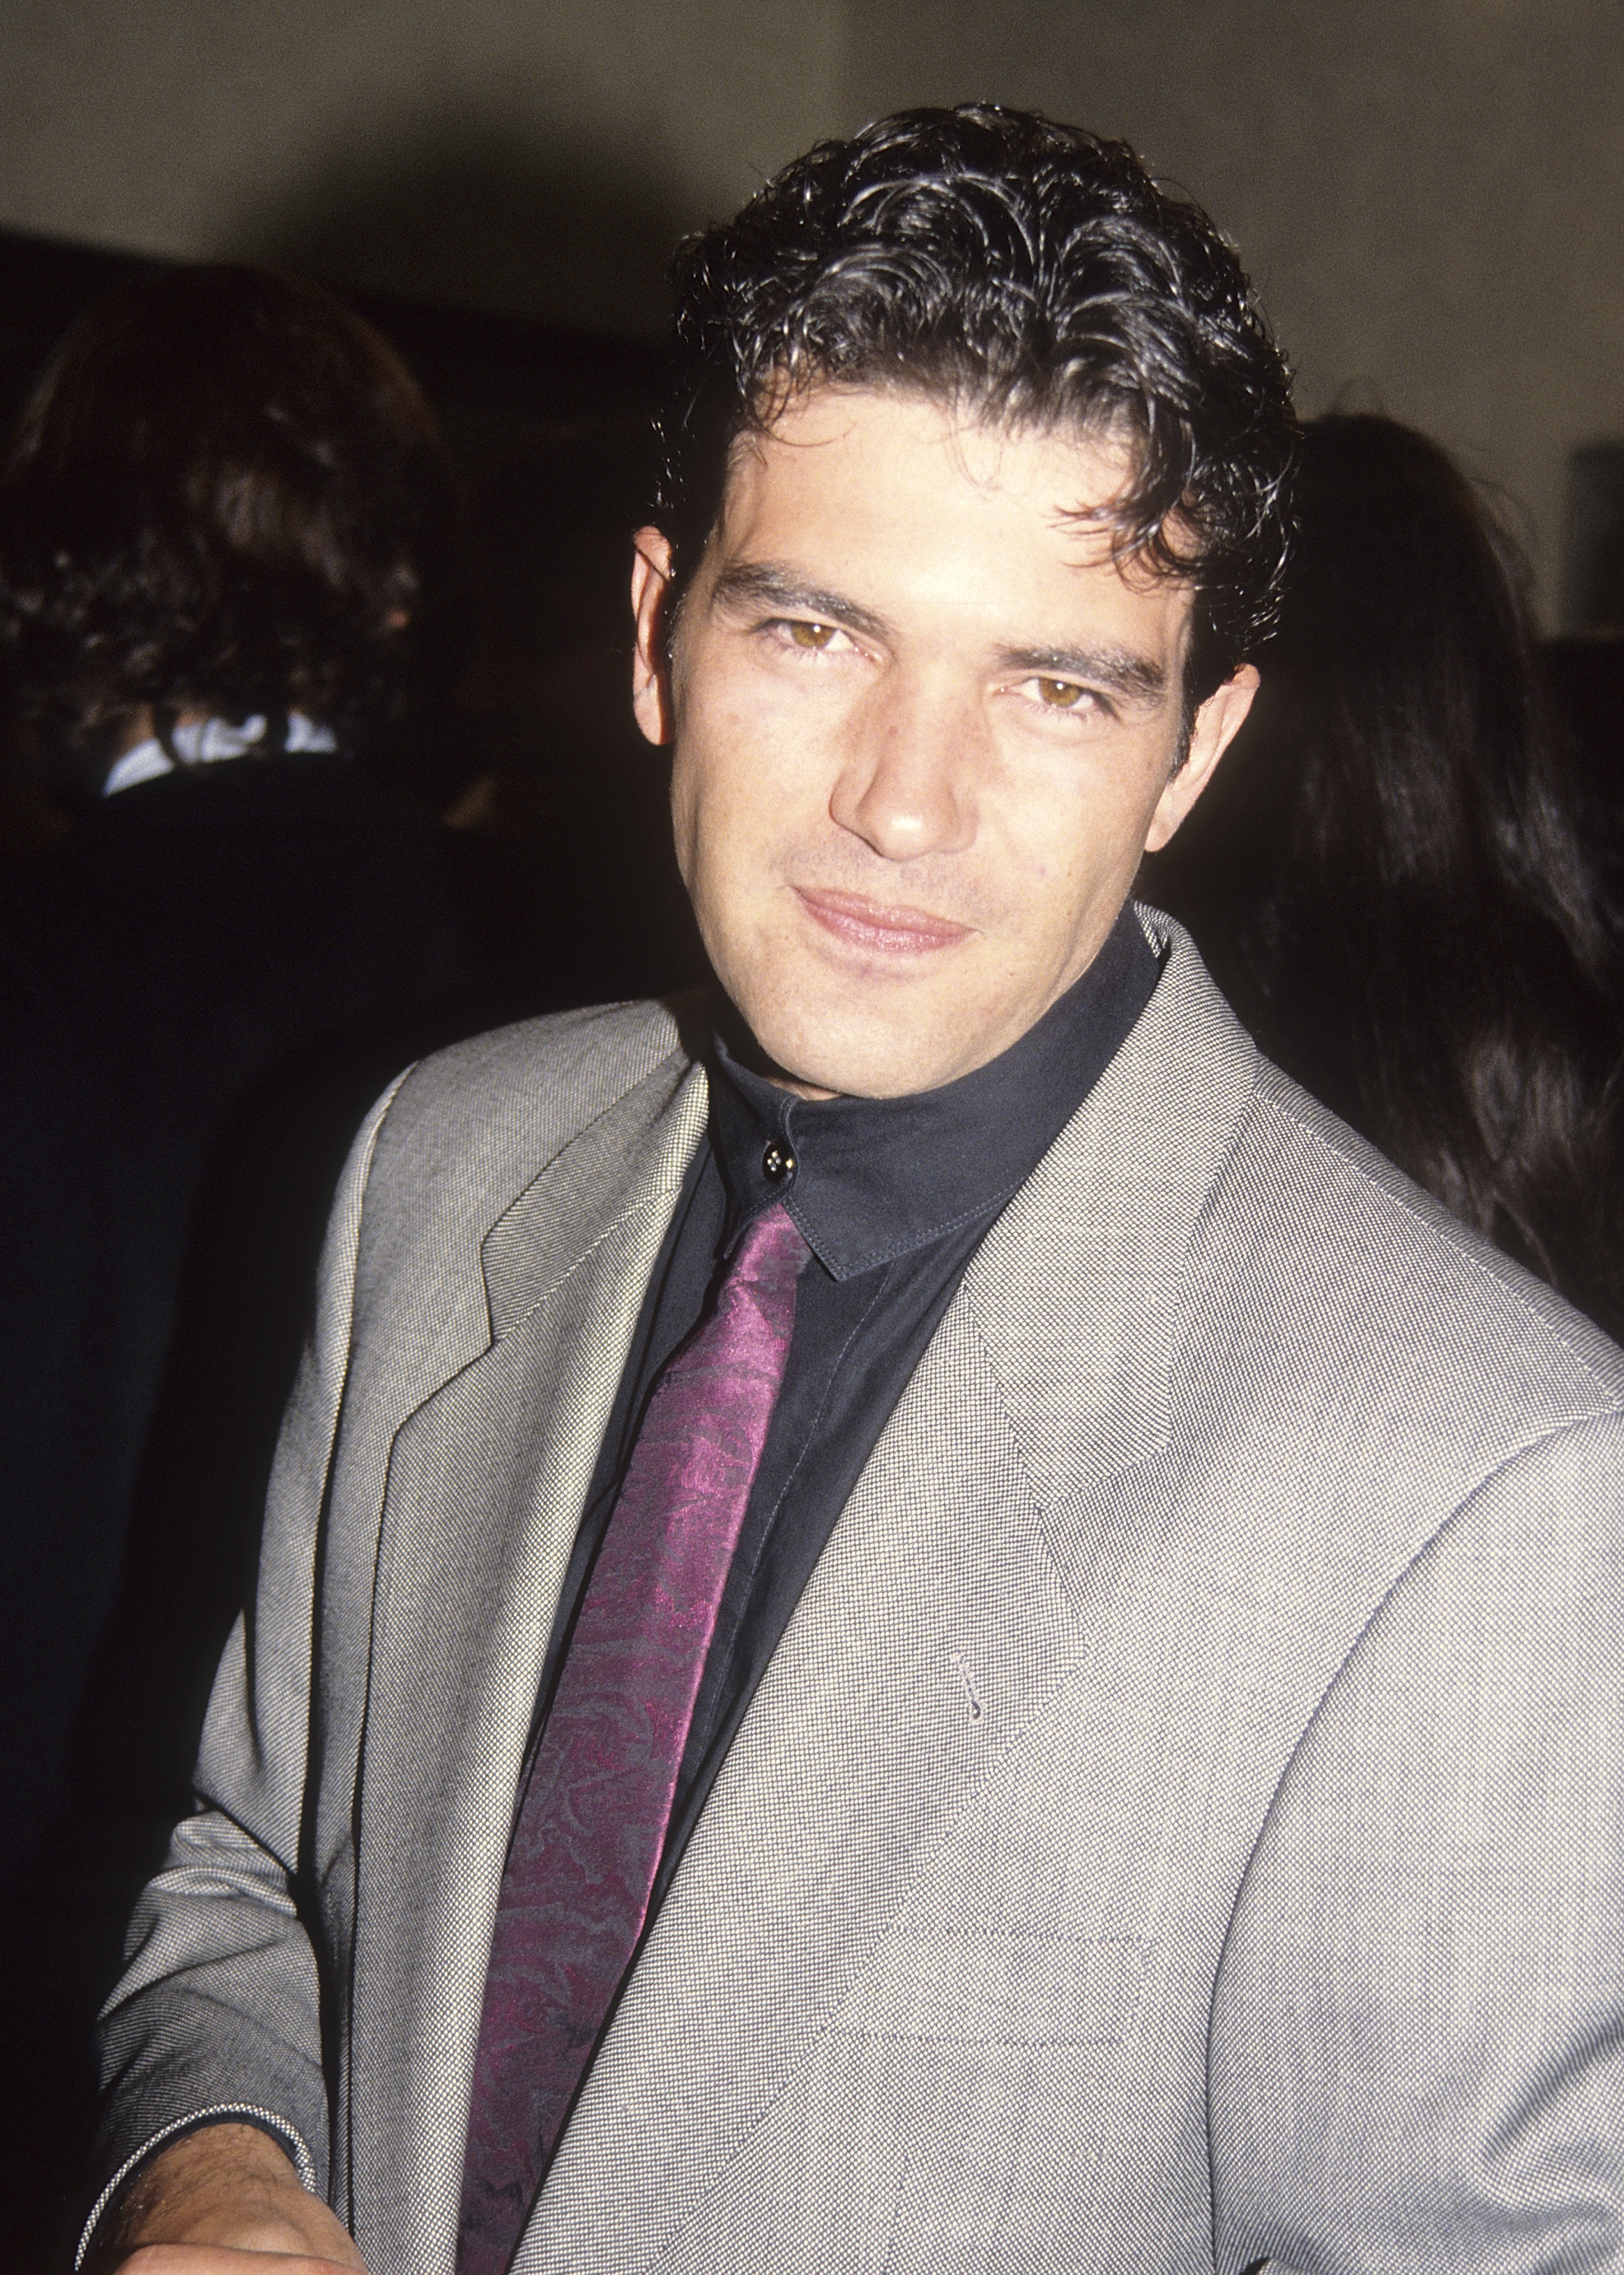 Antonio Banderas graces "The Mambo Kings" Westwood Premiere on February 26, 1992 in Westwood, California | Source: Getty Images